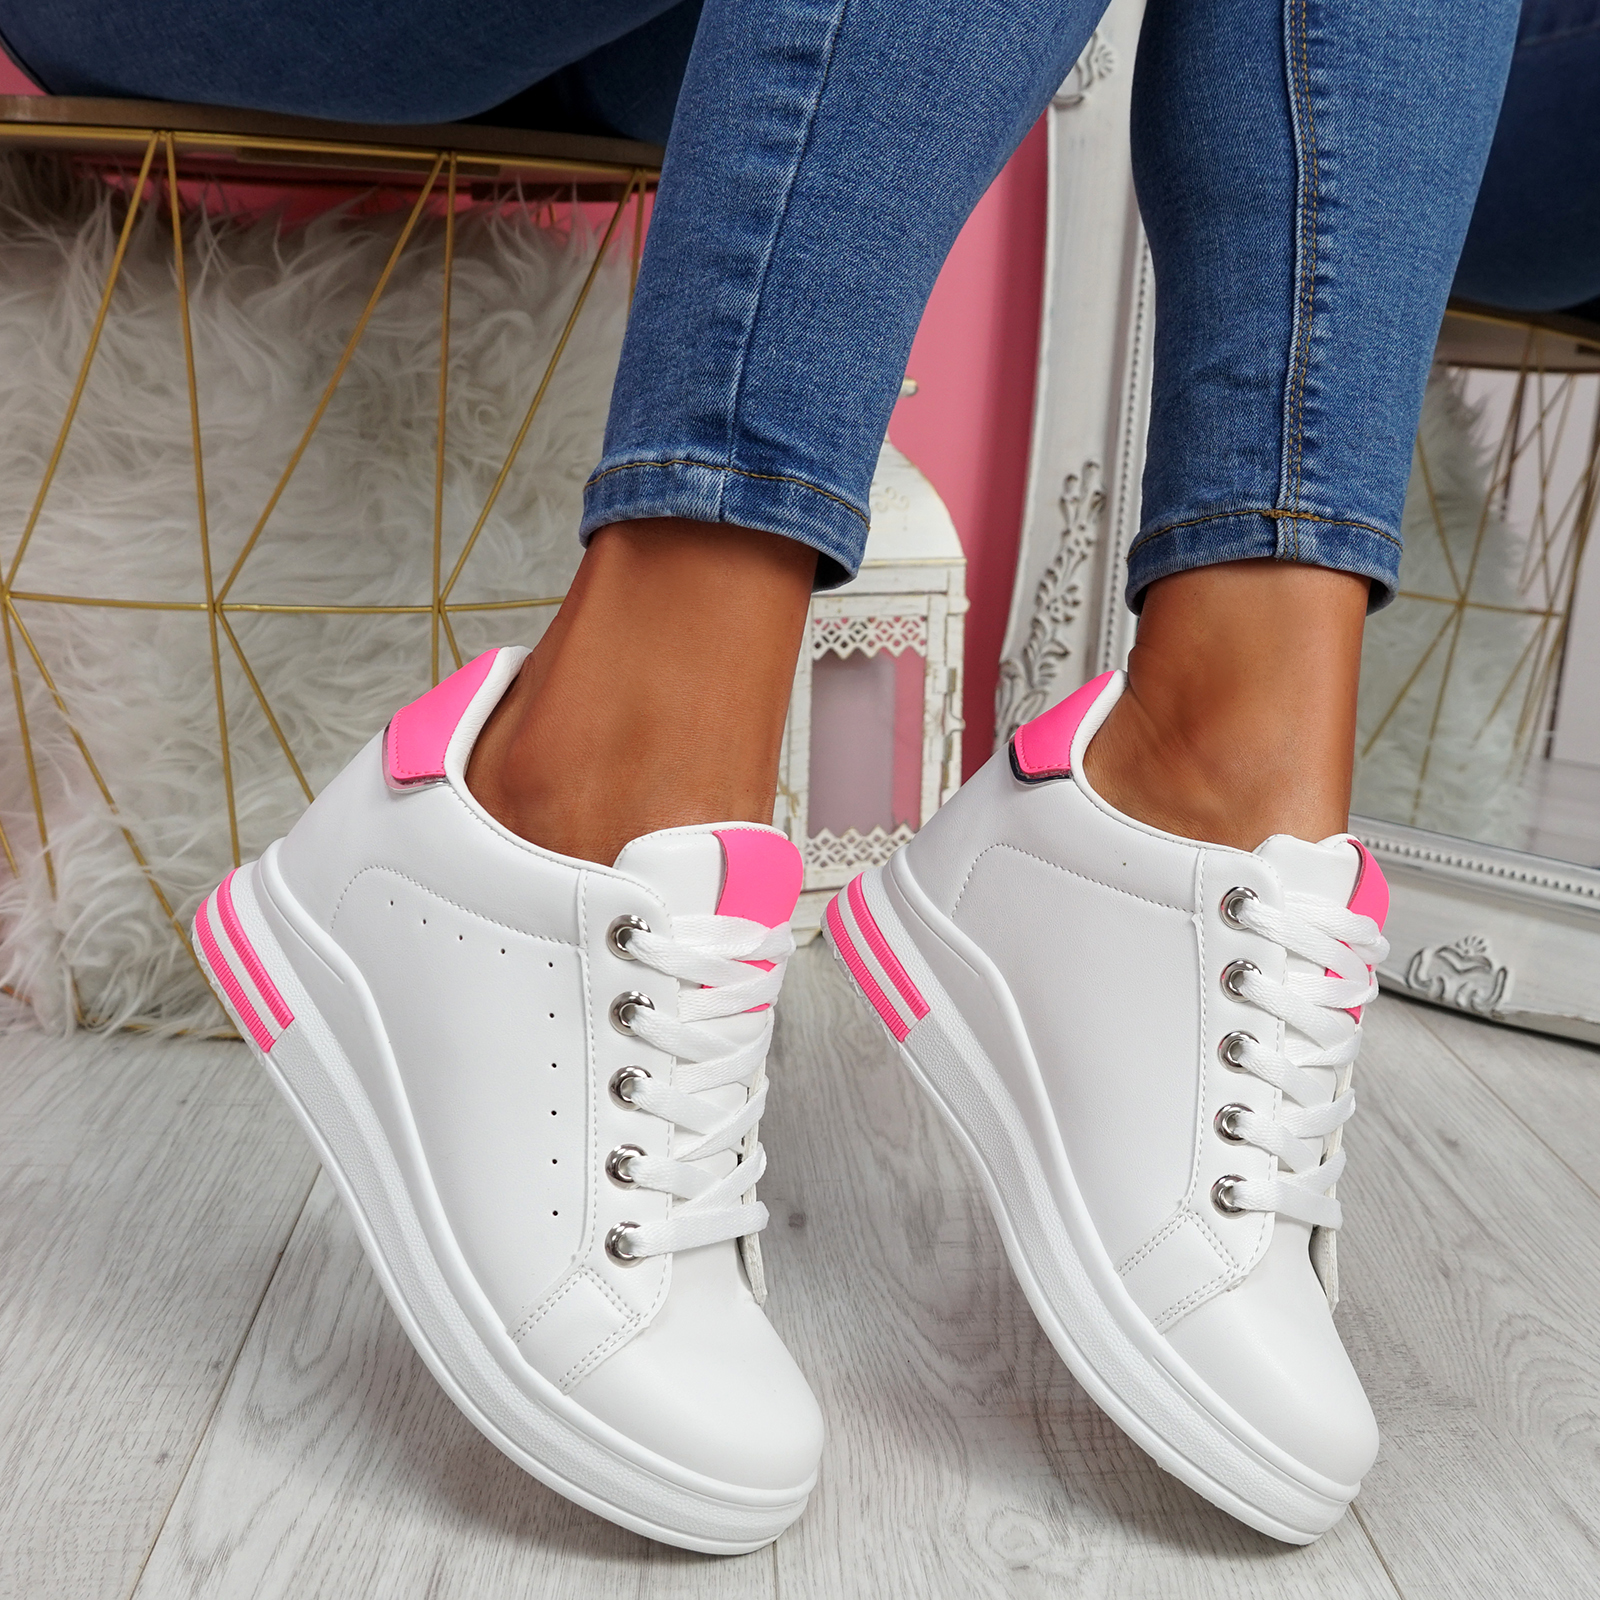 WOMENS LADIES WEDGE TRAINERS LACE UP SLIP ON PARTY SNEAKERS WOMEN SHOES ...